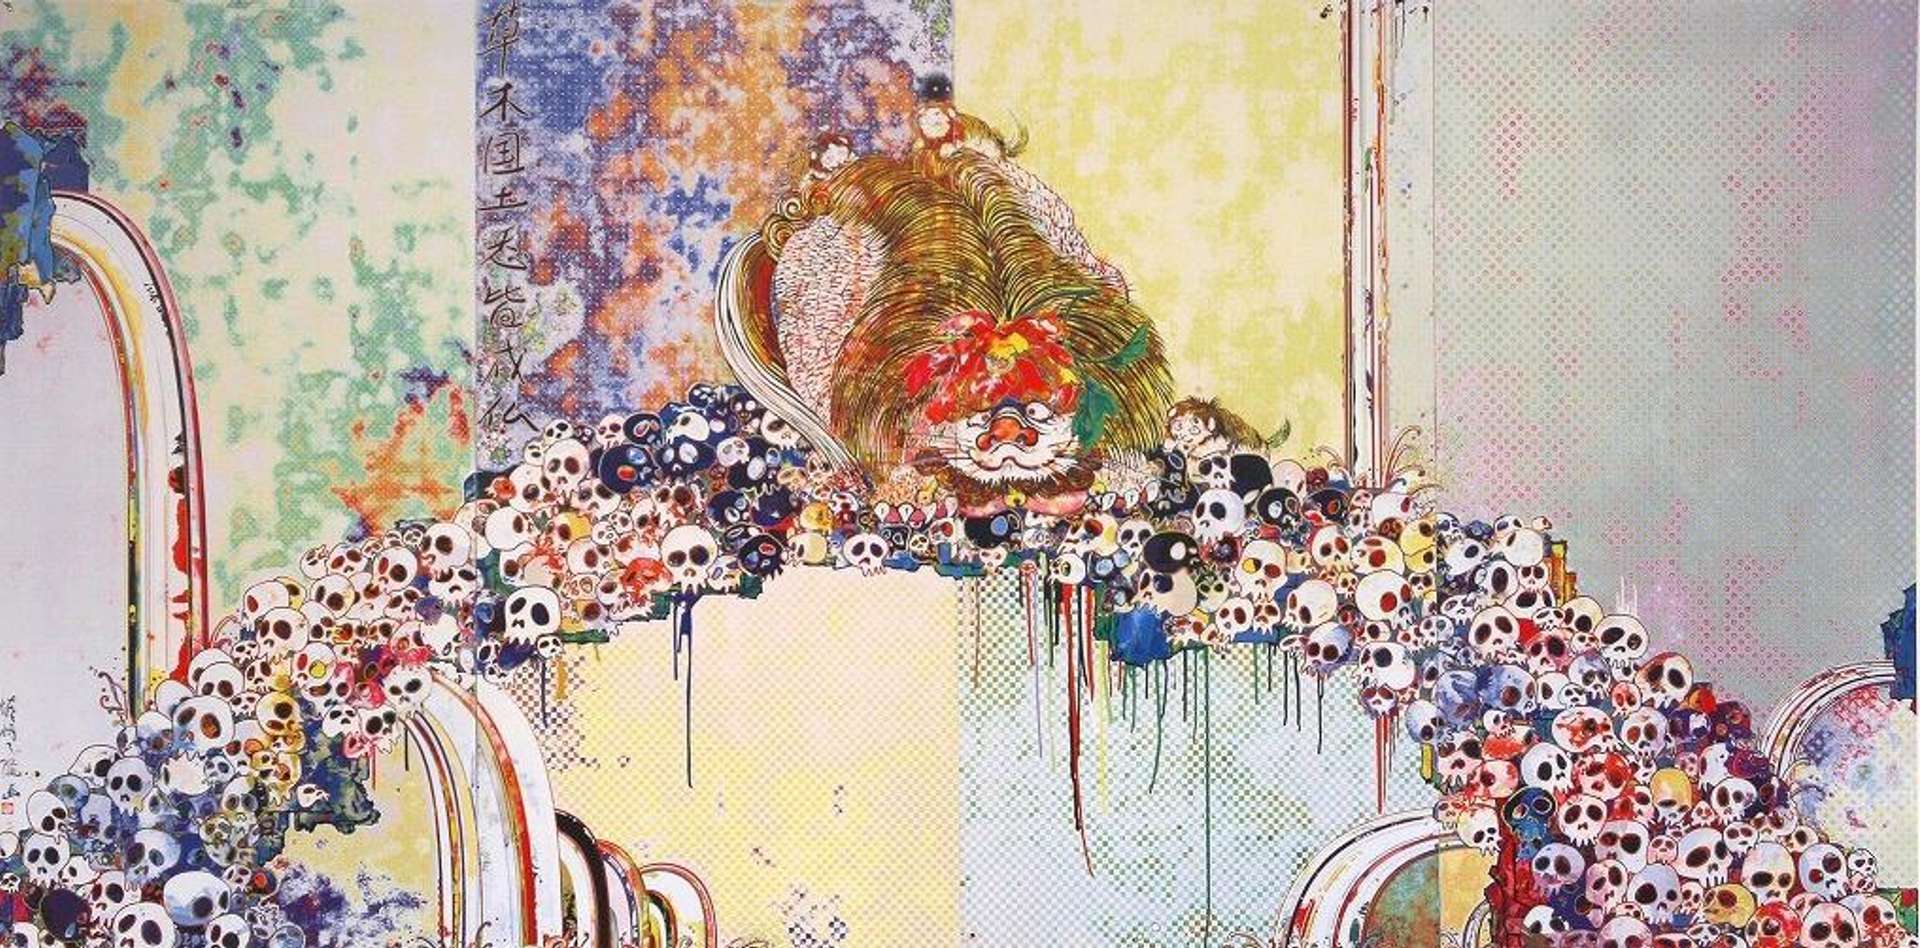 Takashi Murakami: A Picture Of The Blessed Lion Who Stares At Death - Signed Print